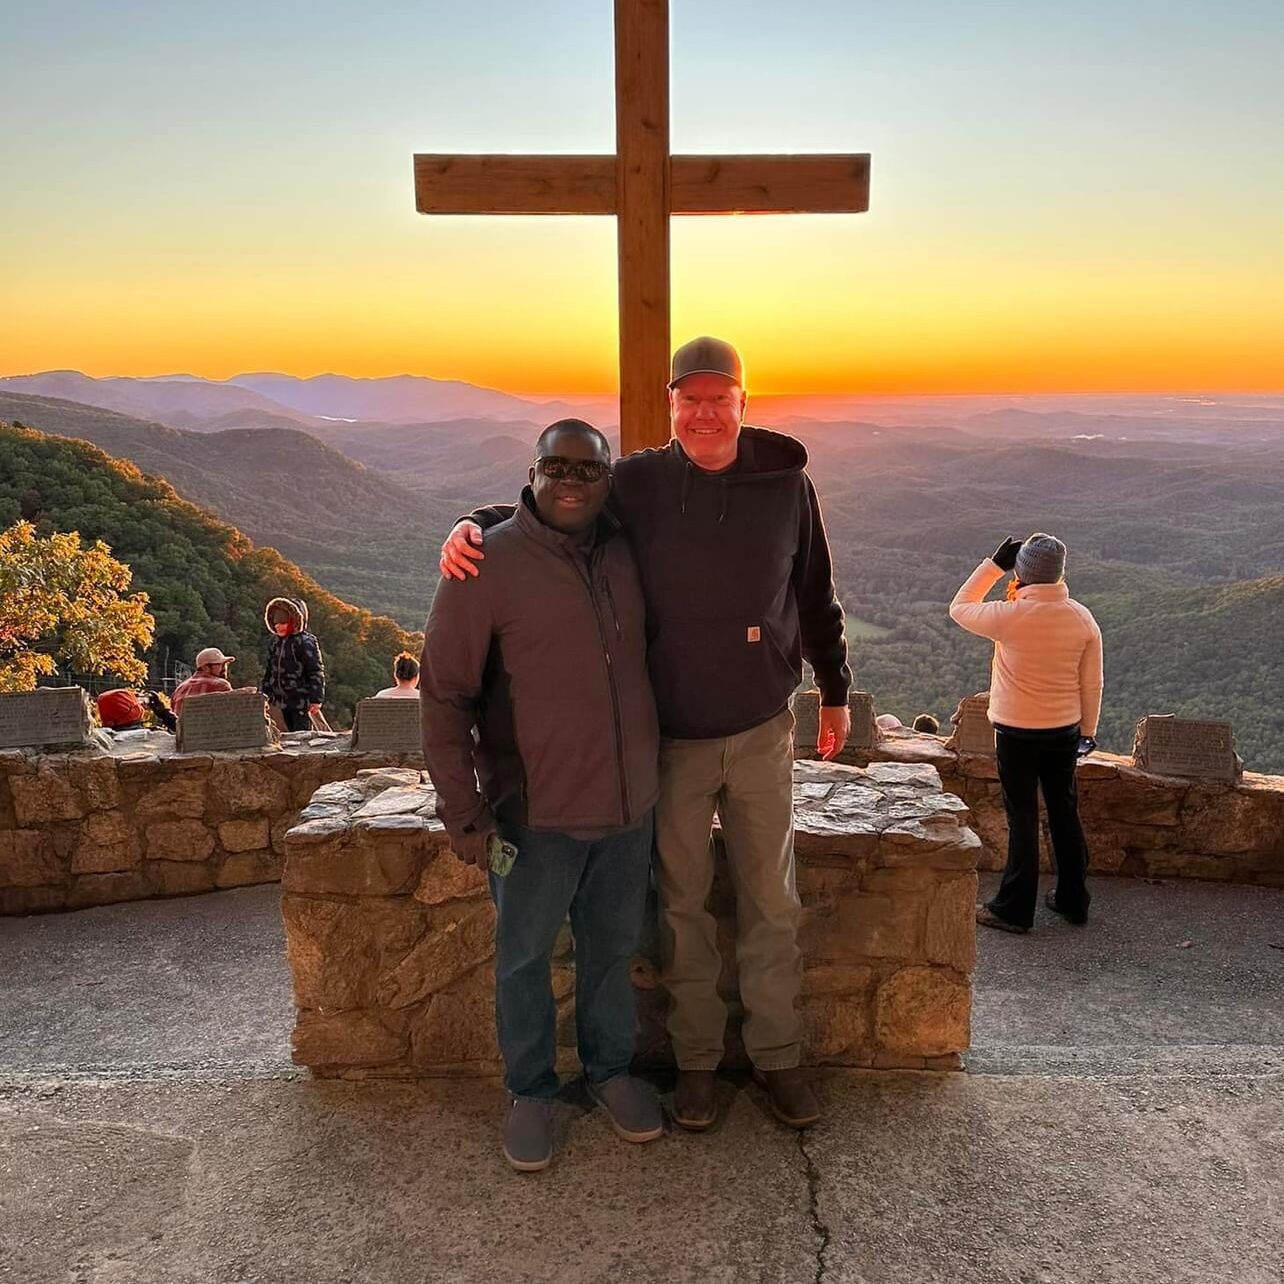 Men standing hugging each other before a cross with a sunset and mountain vista in the background